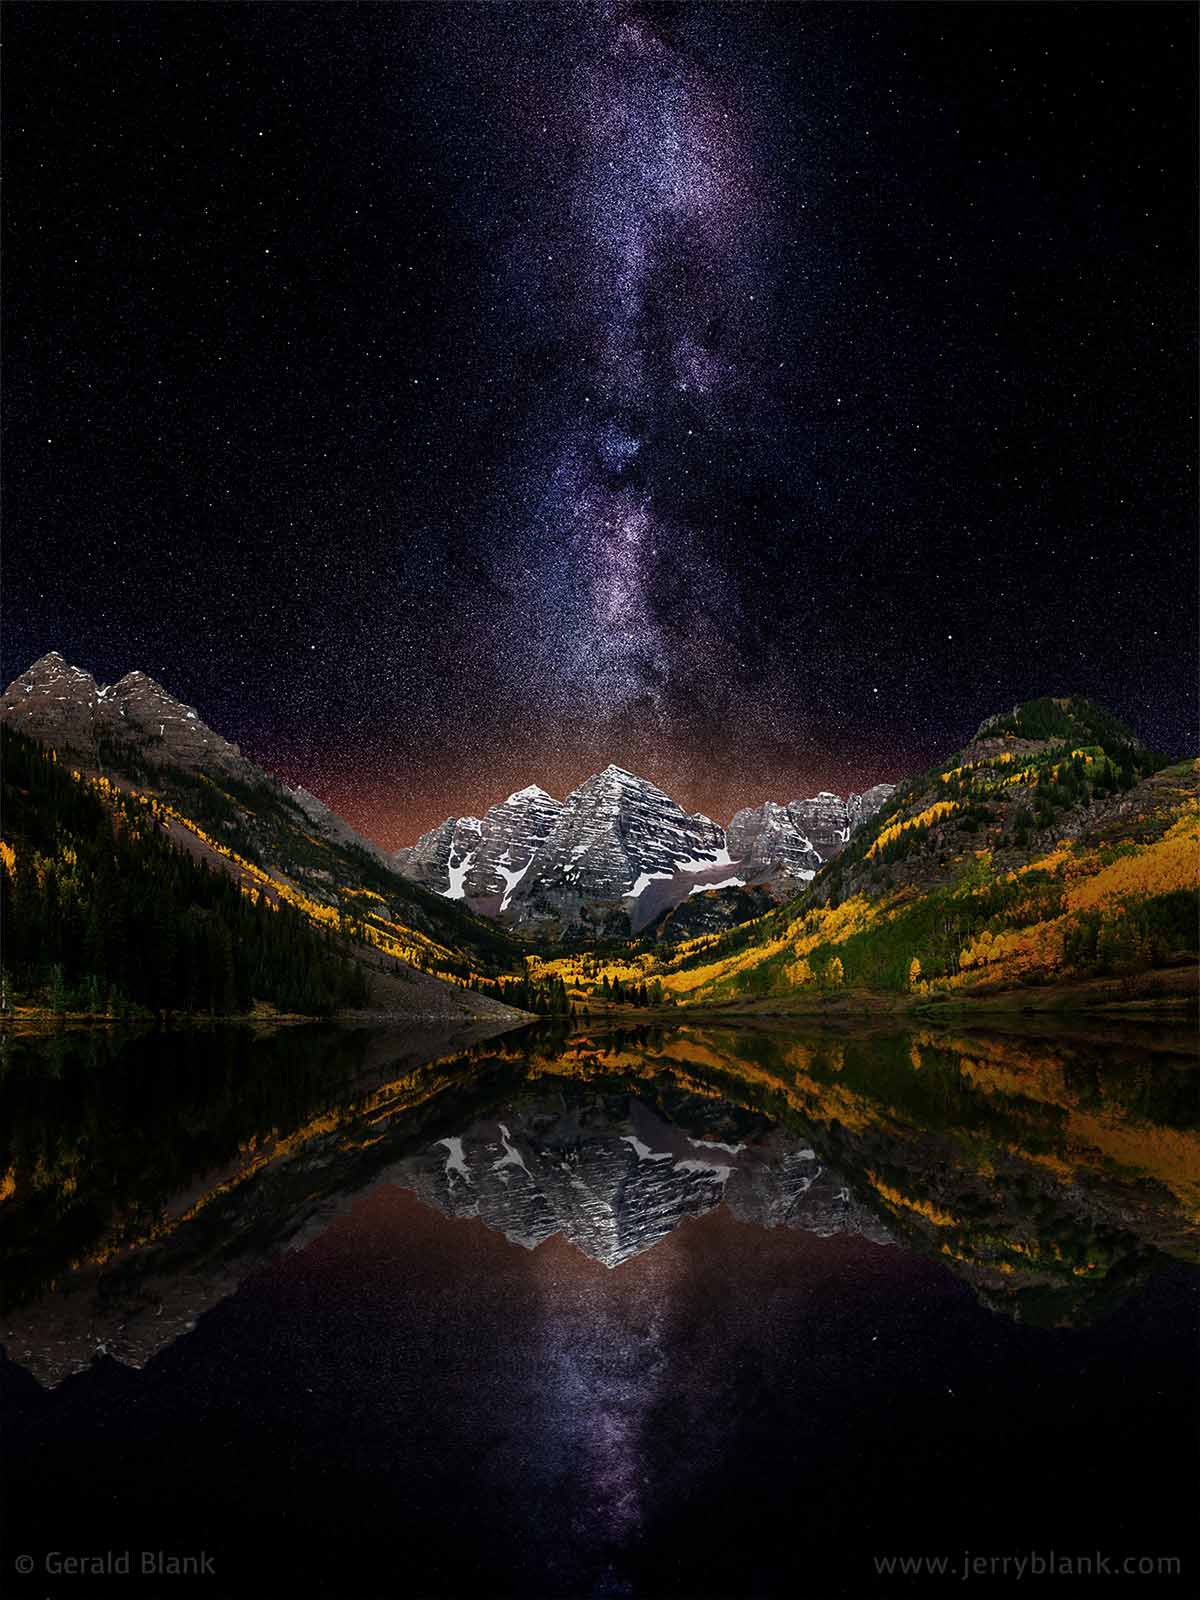 #40560 - A starry night view of the Milky Way and the Maroon Bells in autumn, reflected in Maroon Lake, Colorado.